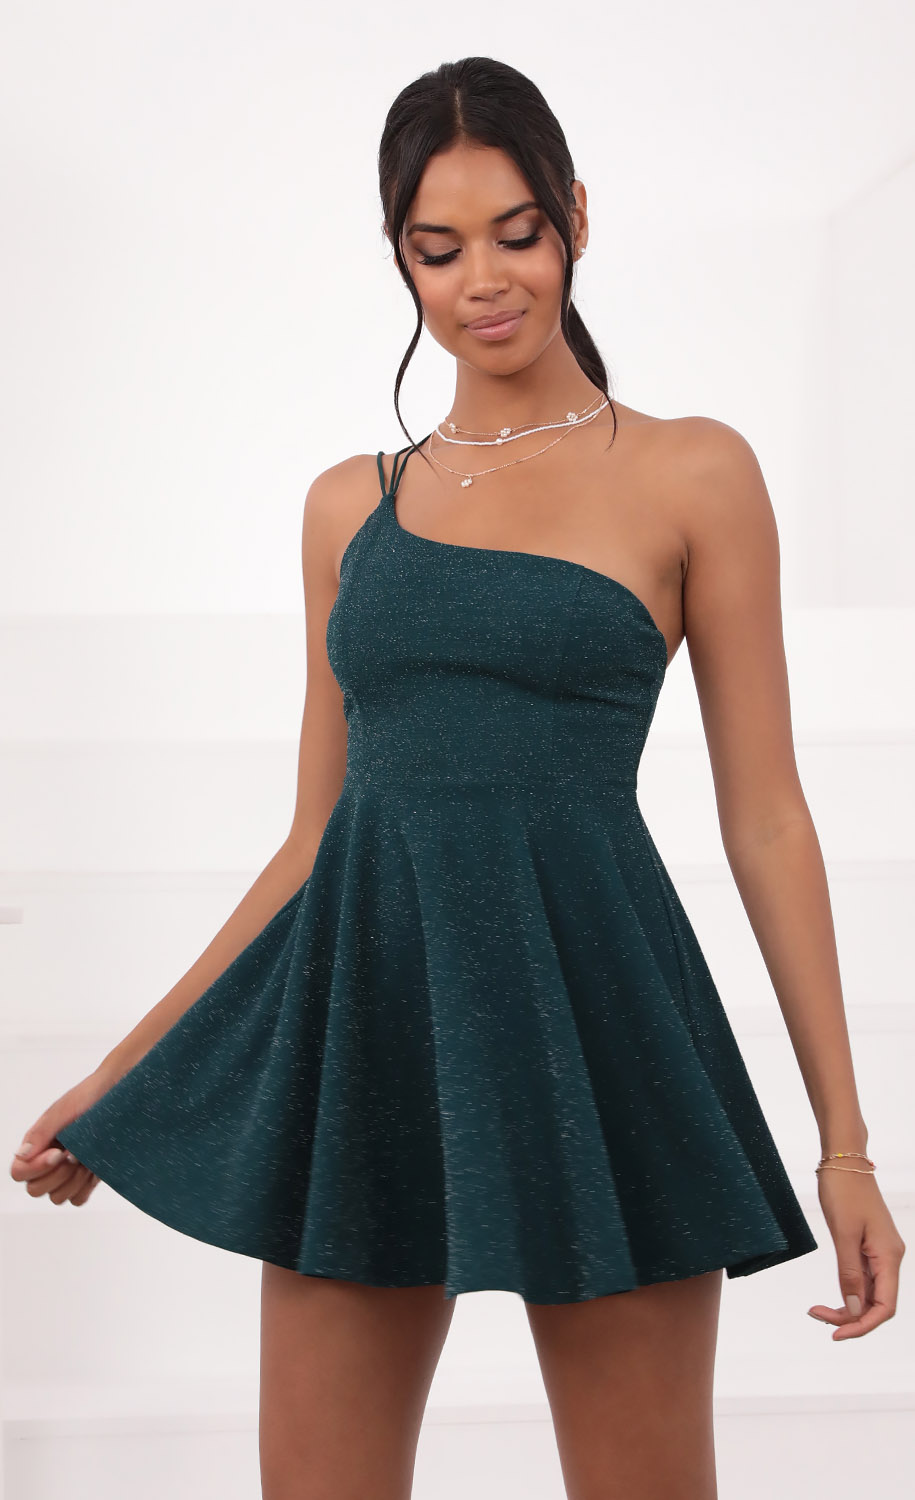 Aylah One Shoulder Dress in Turquoise Sparkle